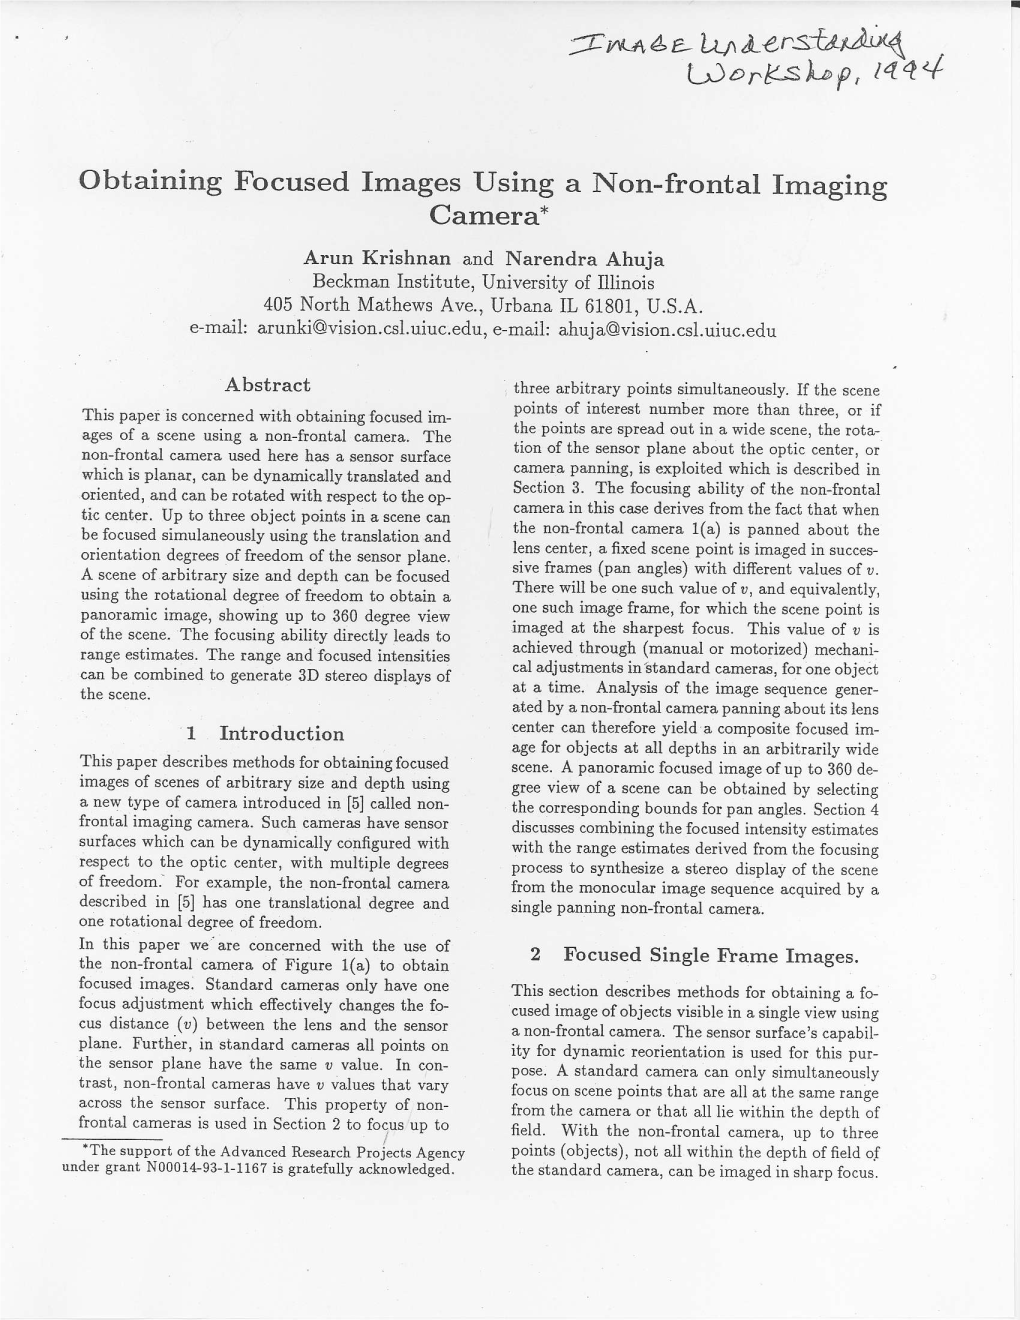 Obtaining Focused Images Using a Non-Frontal Imaging Camera*